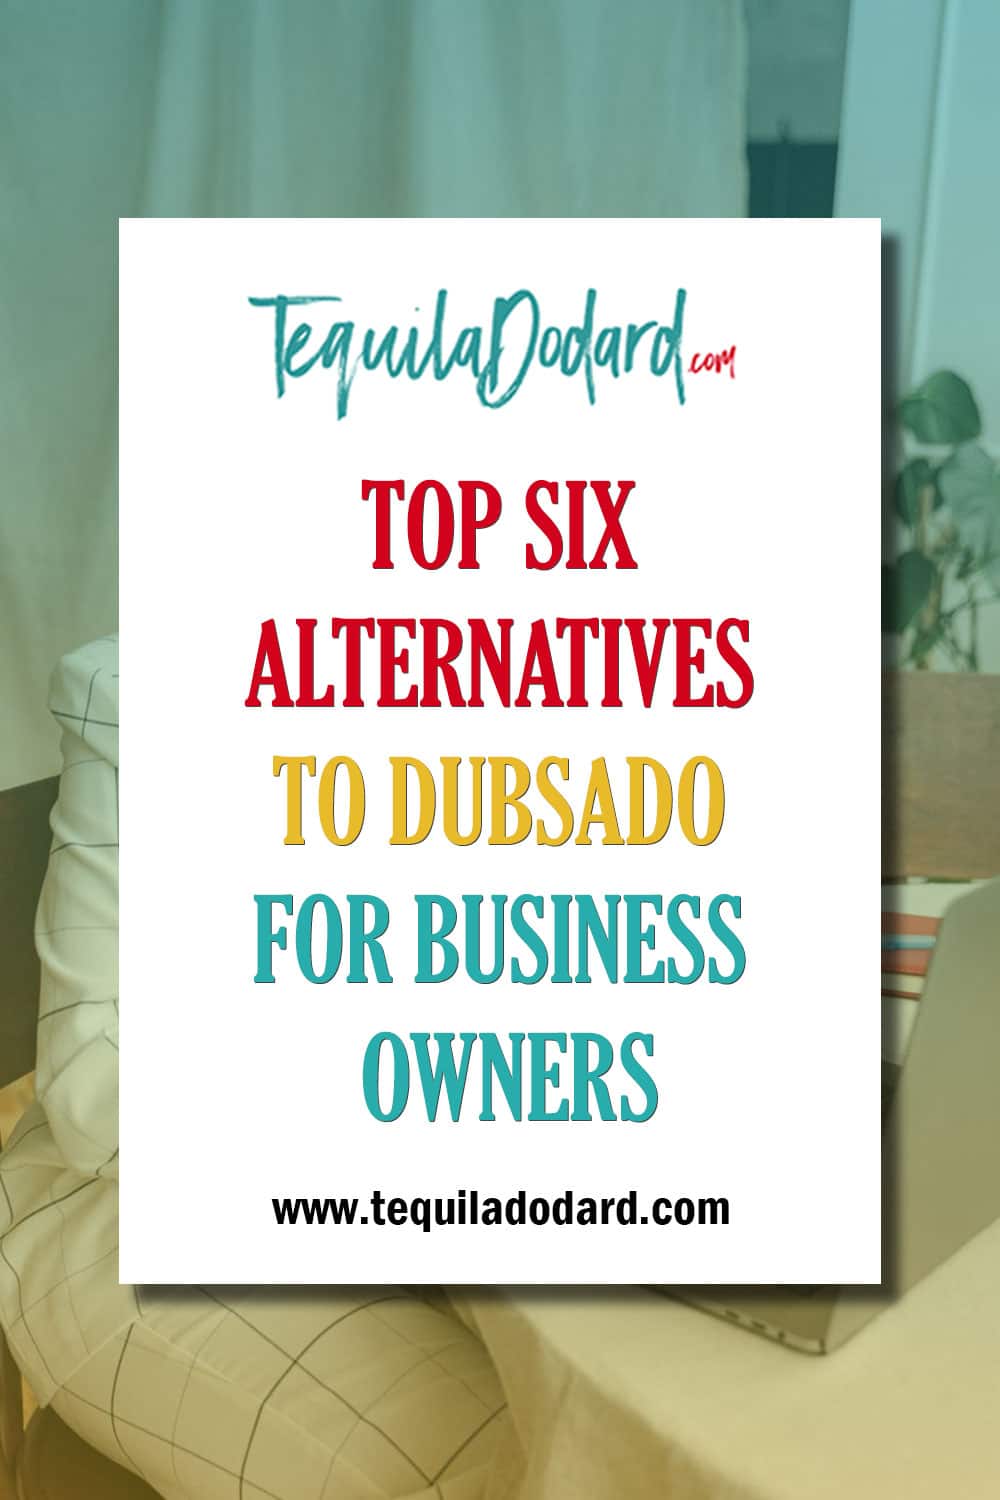 Top-Six-Alternatives-to-Dubsado-For-business-owners